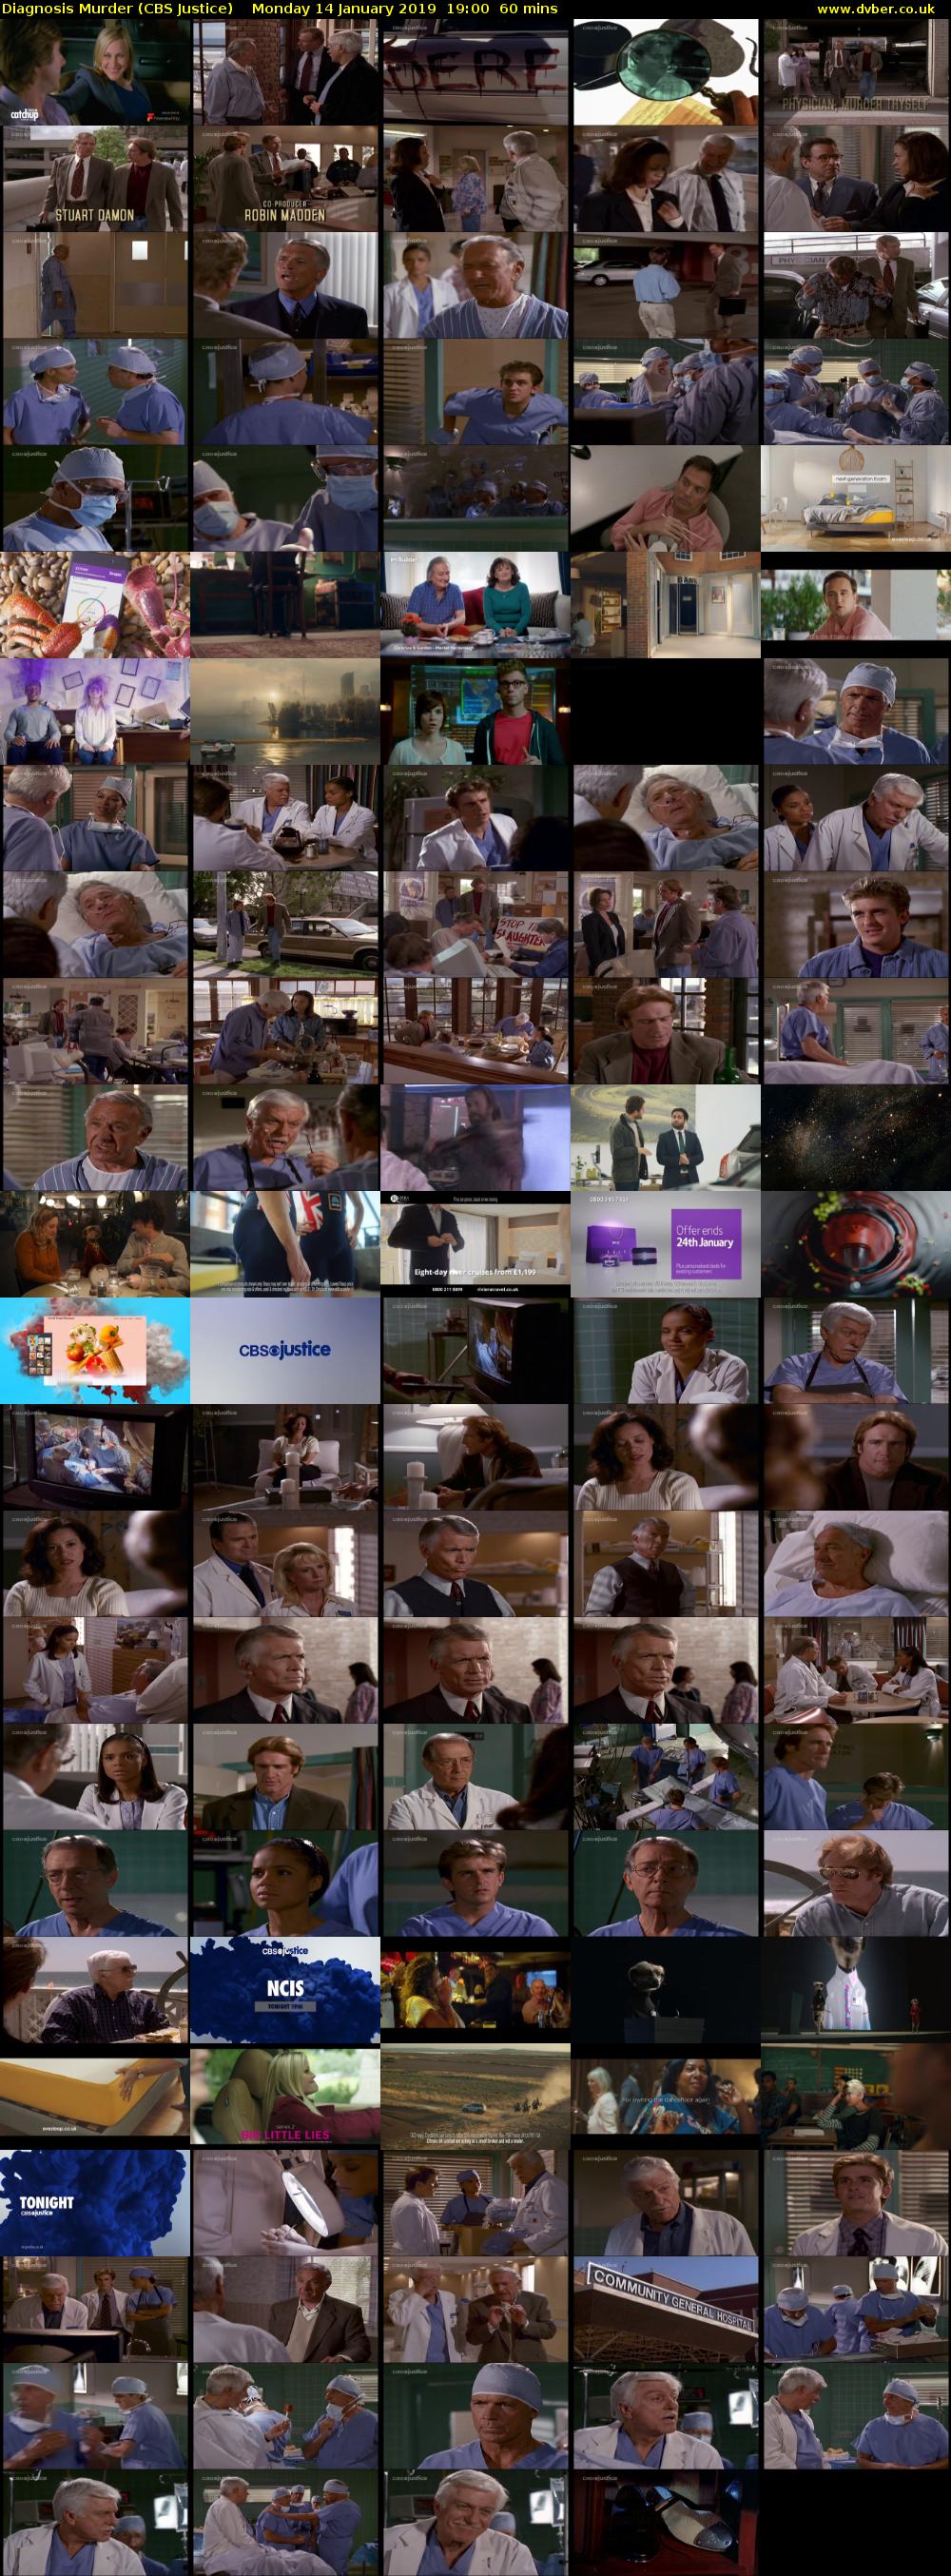 Diagnosis Murder (CBS Justice) Monday 14 January 2019 19:00 - 20:00